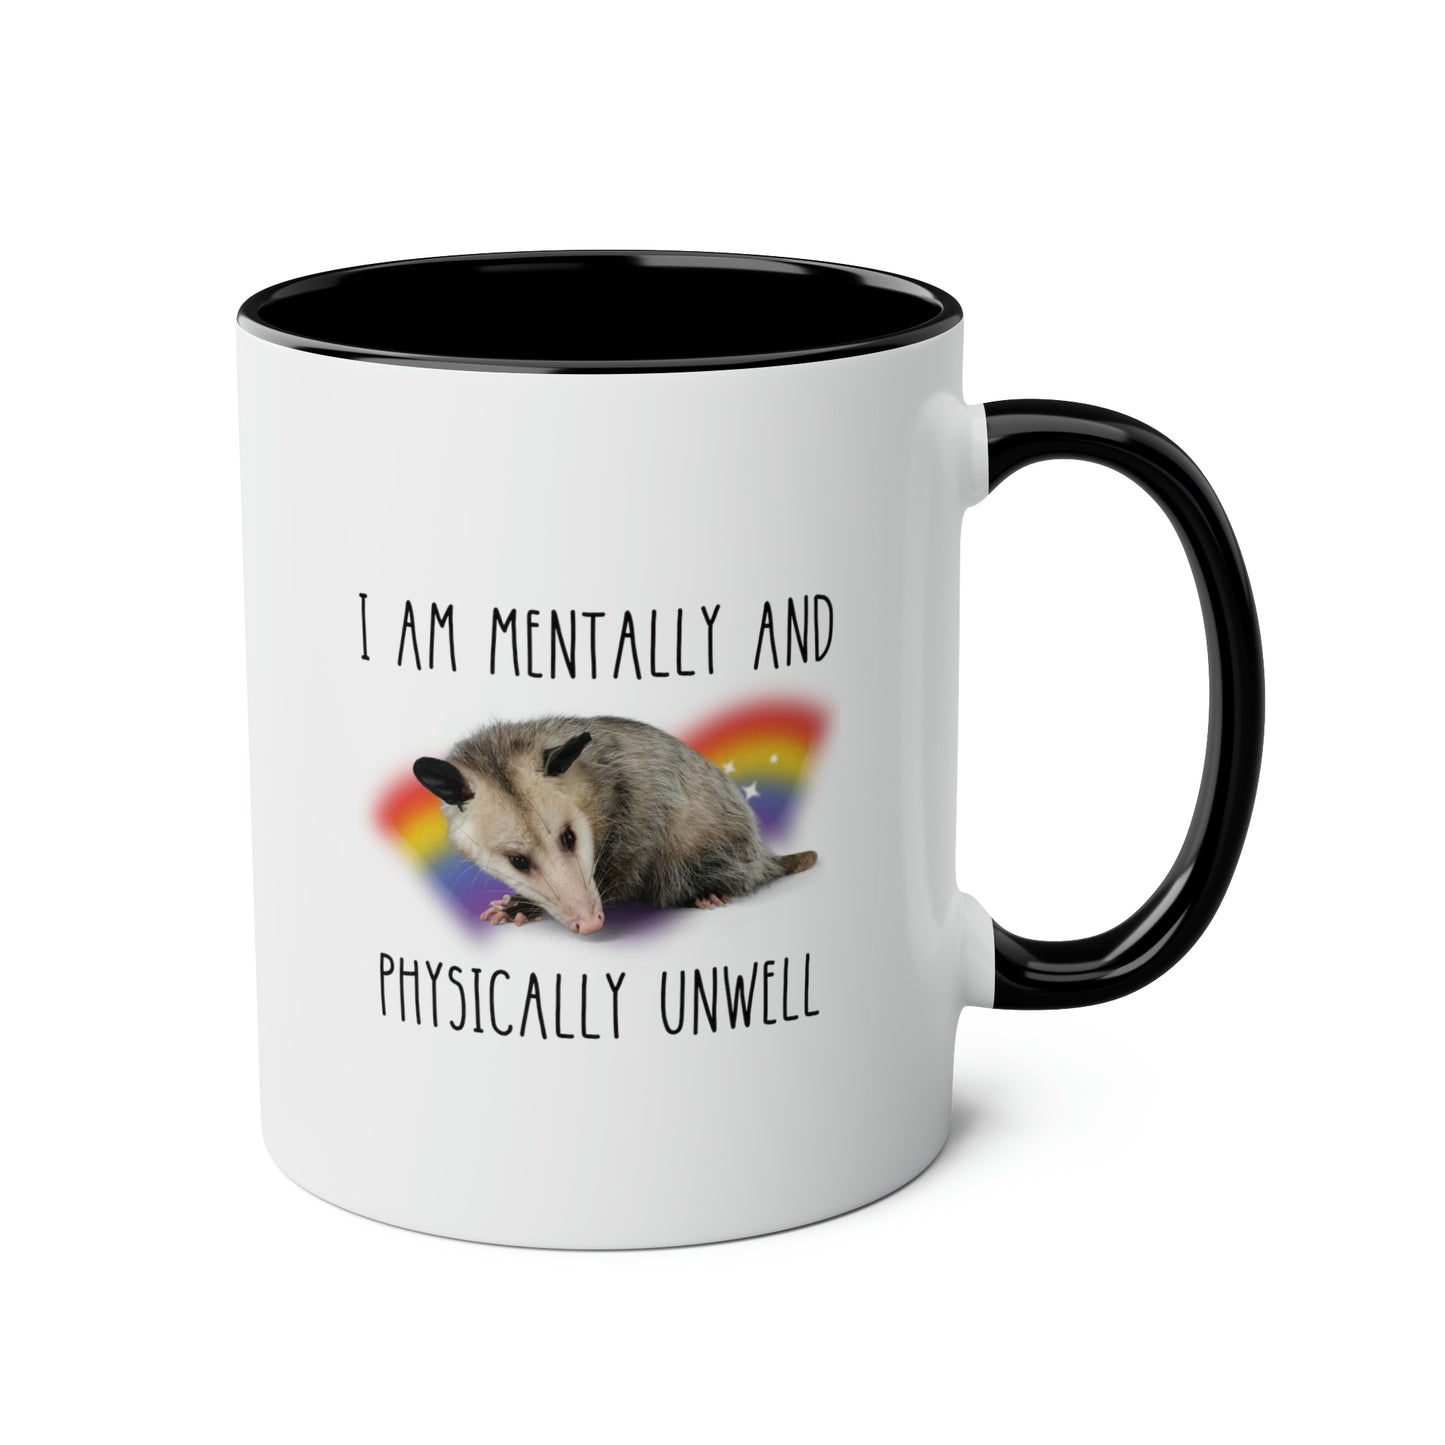 I Am Mentally And Physically Unwell 11oz white with black accent funny large coffee mug gift for mental health meme retro rainbow sparkles possum lover opossum waveywares wavey wares wavywares wavy wares